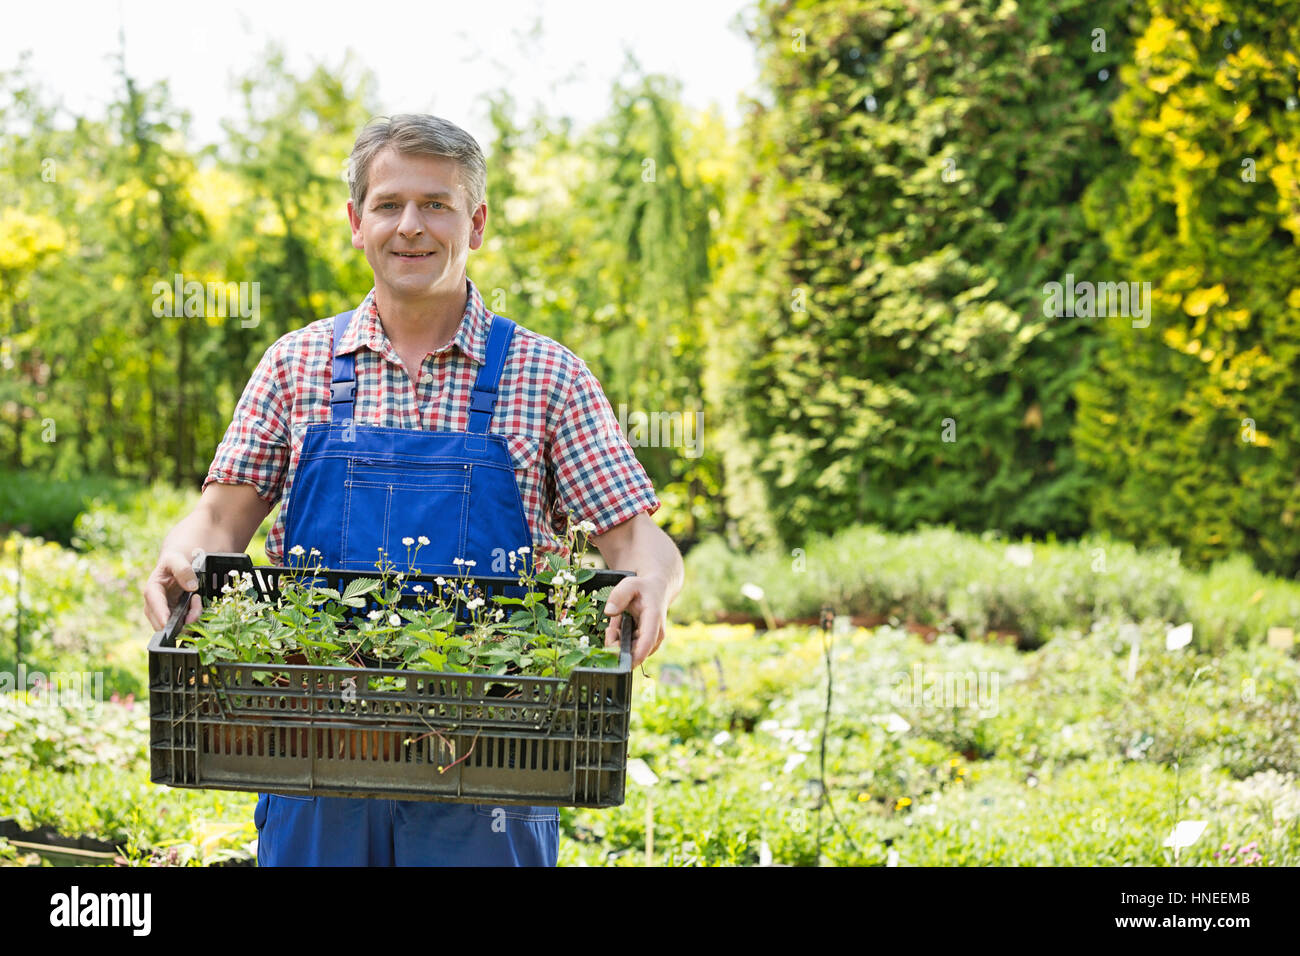 Portrait of confident man holding crate of potted plants at garden Stock Photo